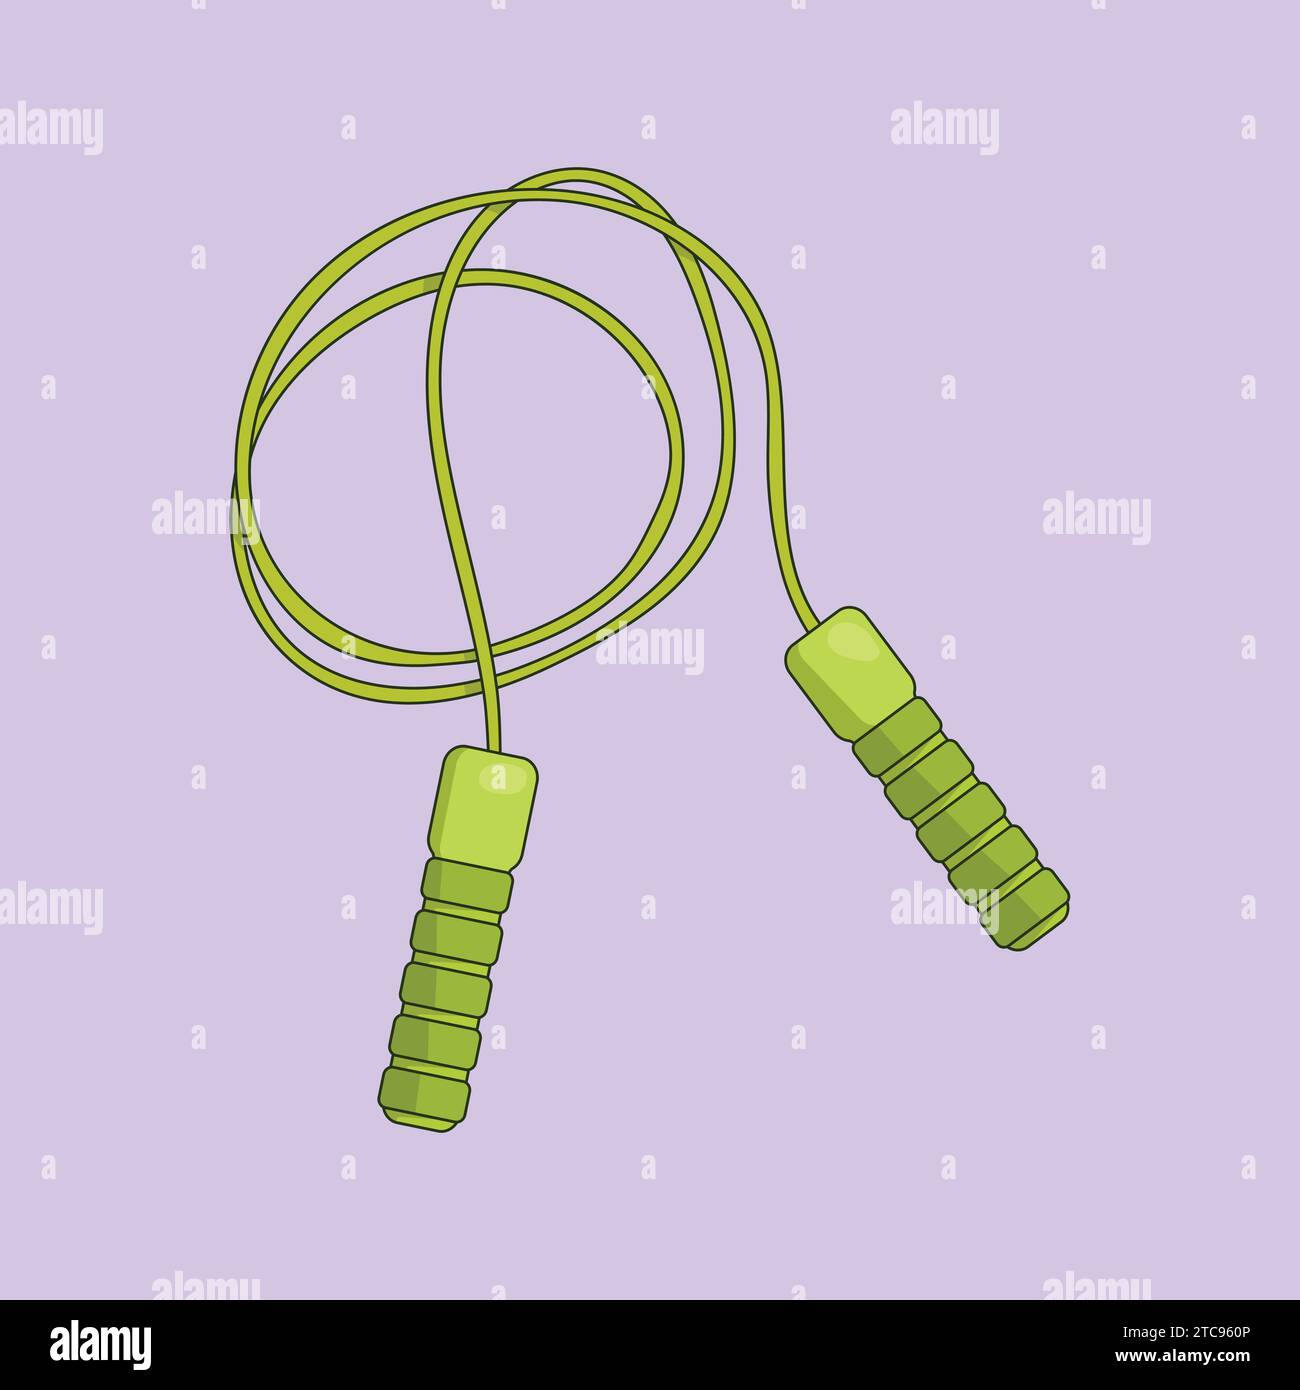 Skipping Jumping Ropes Illustration Vector Icon Gym Equipment sports Stock Vector